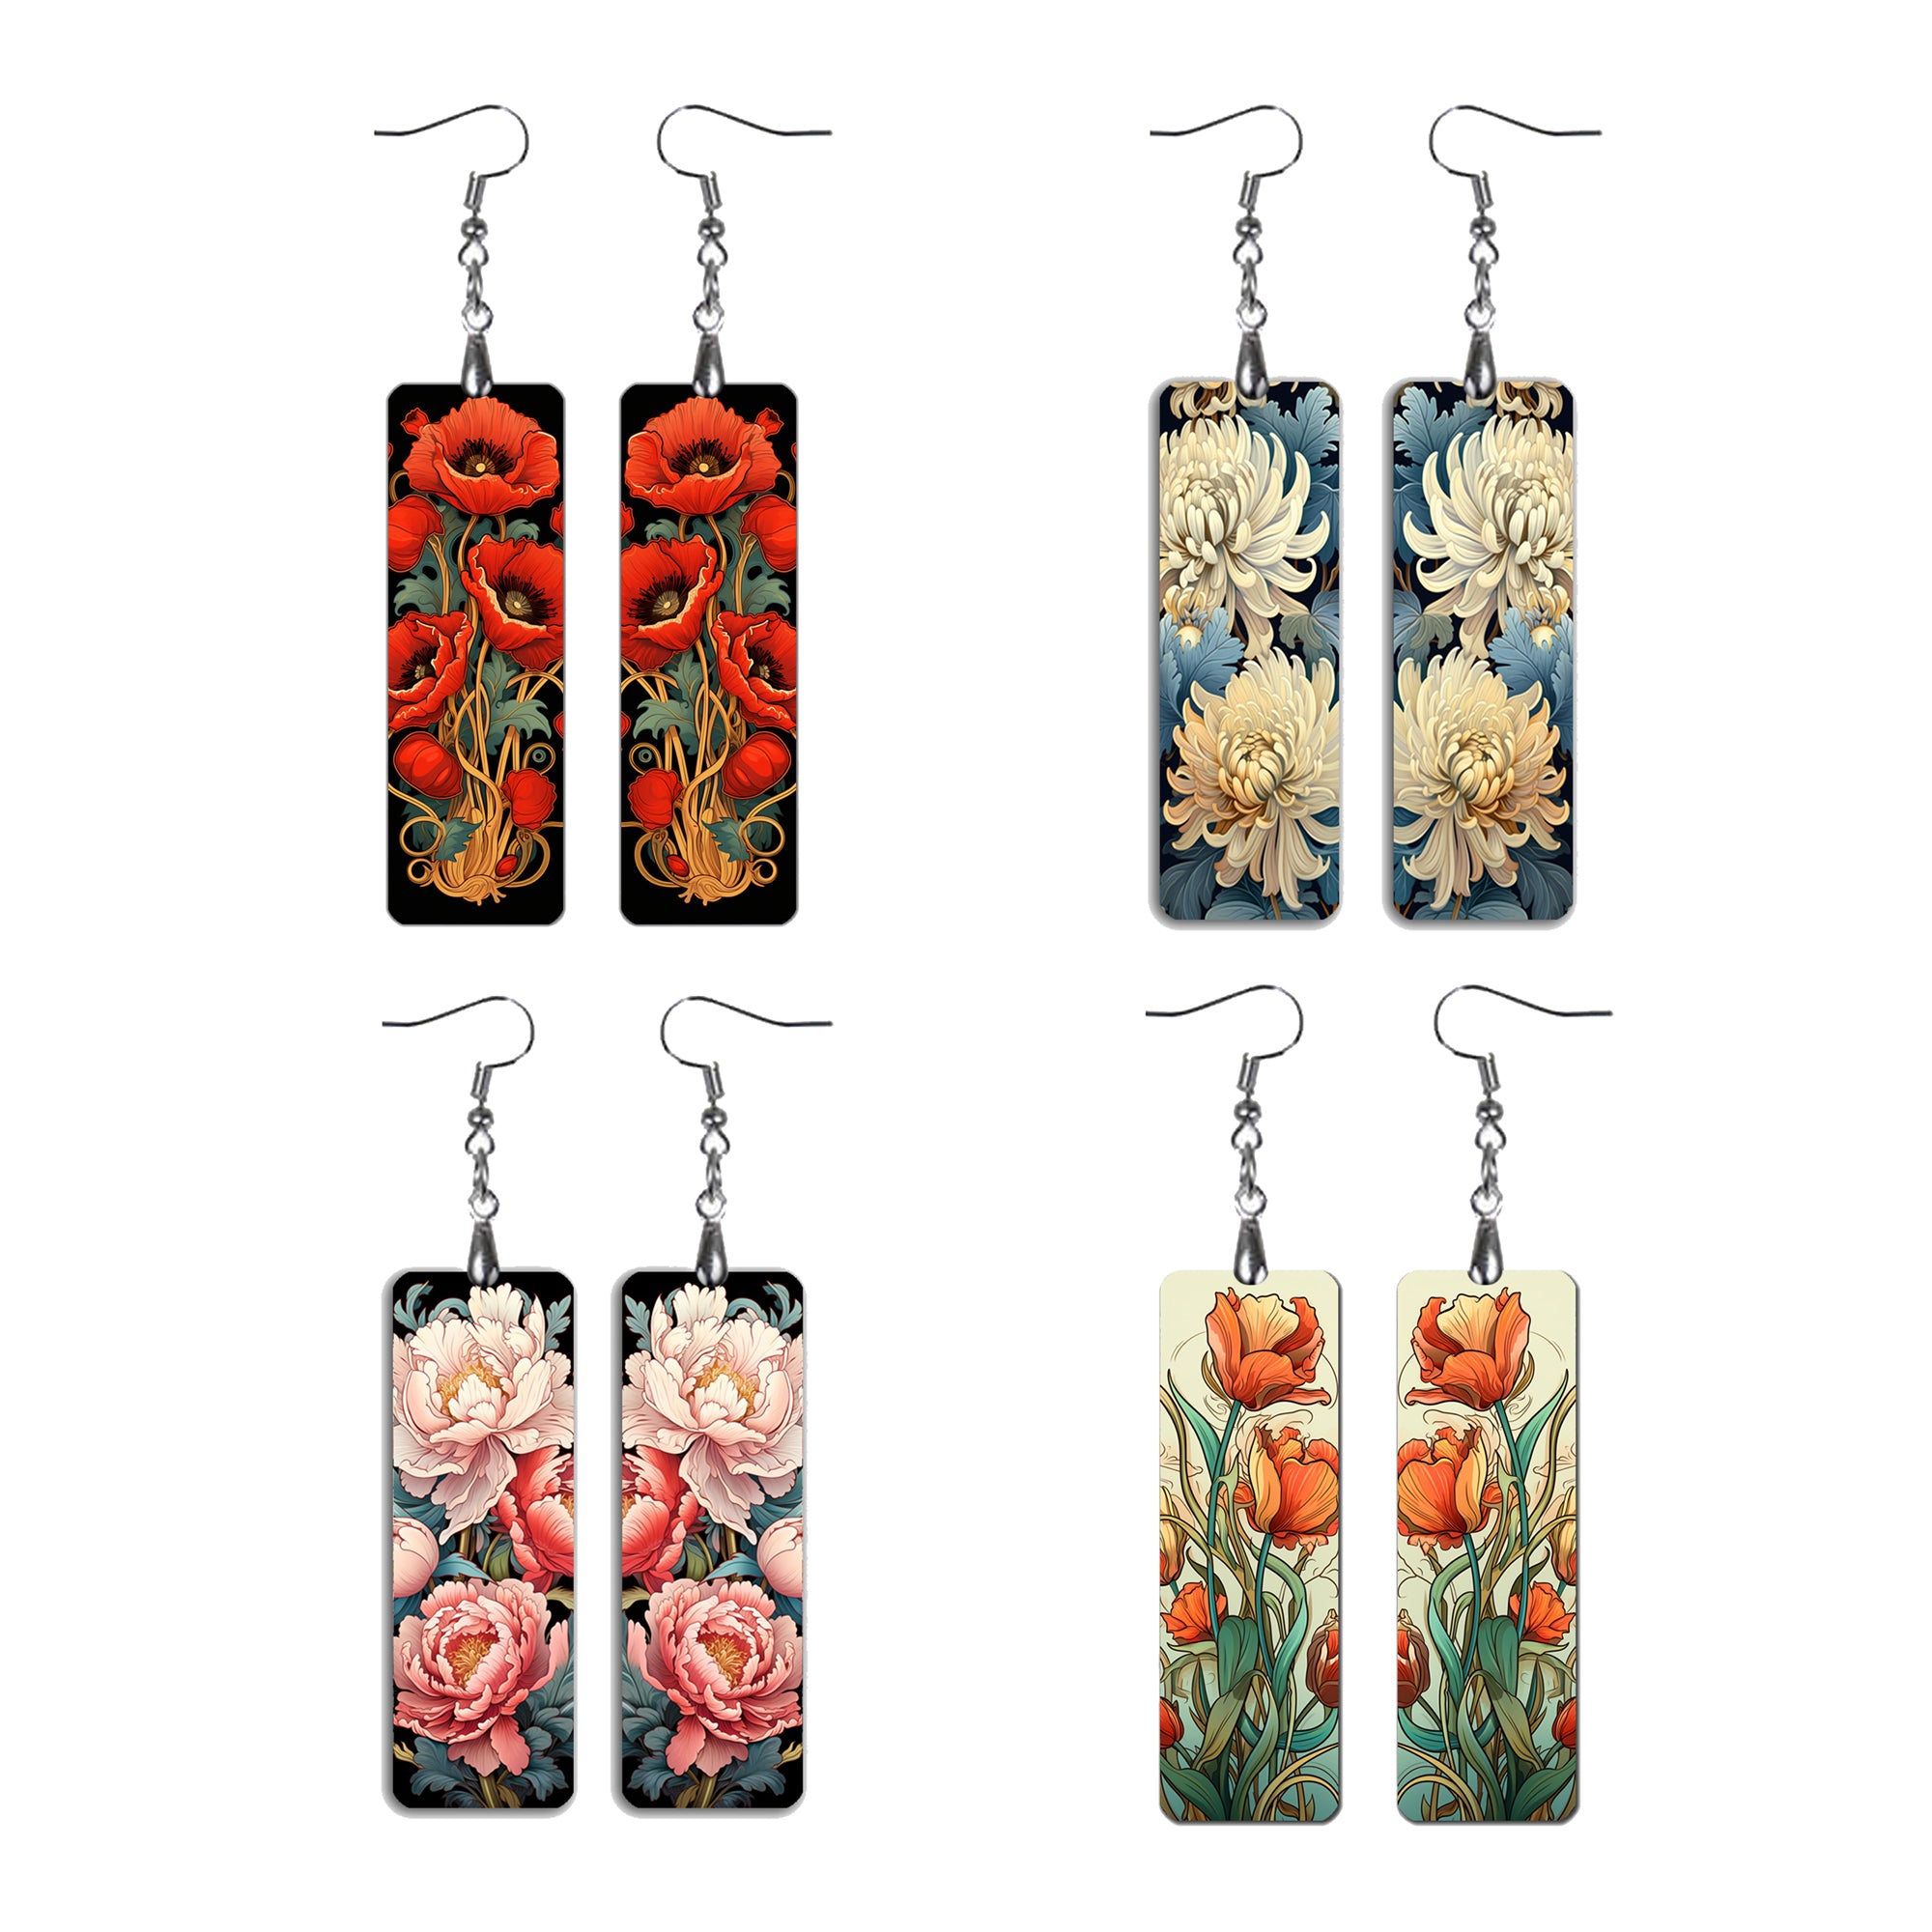 Earrings with floral prints in vintage Art Nouveau style